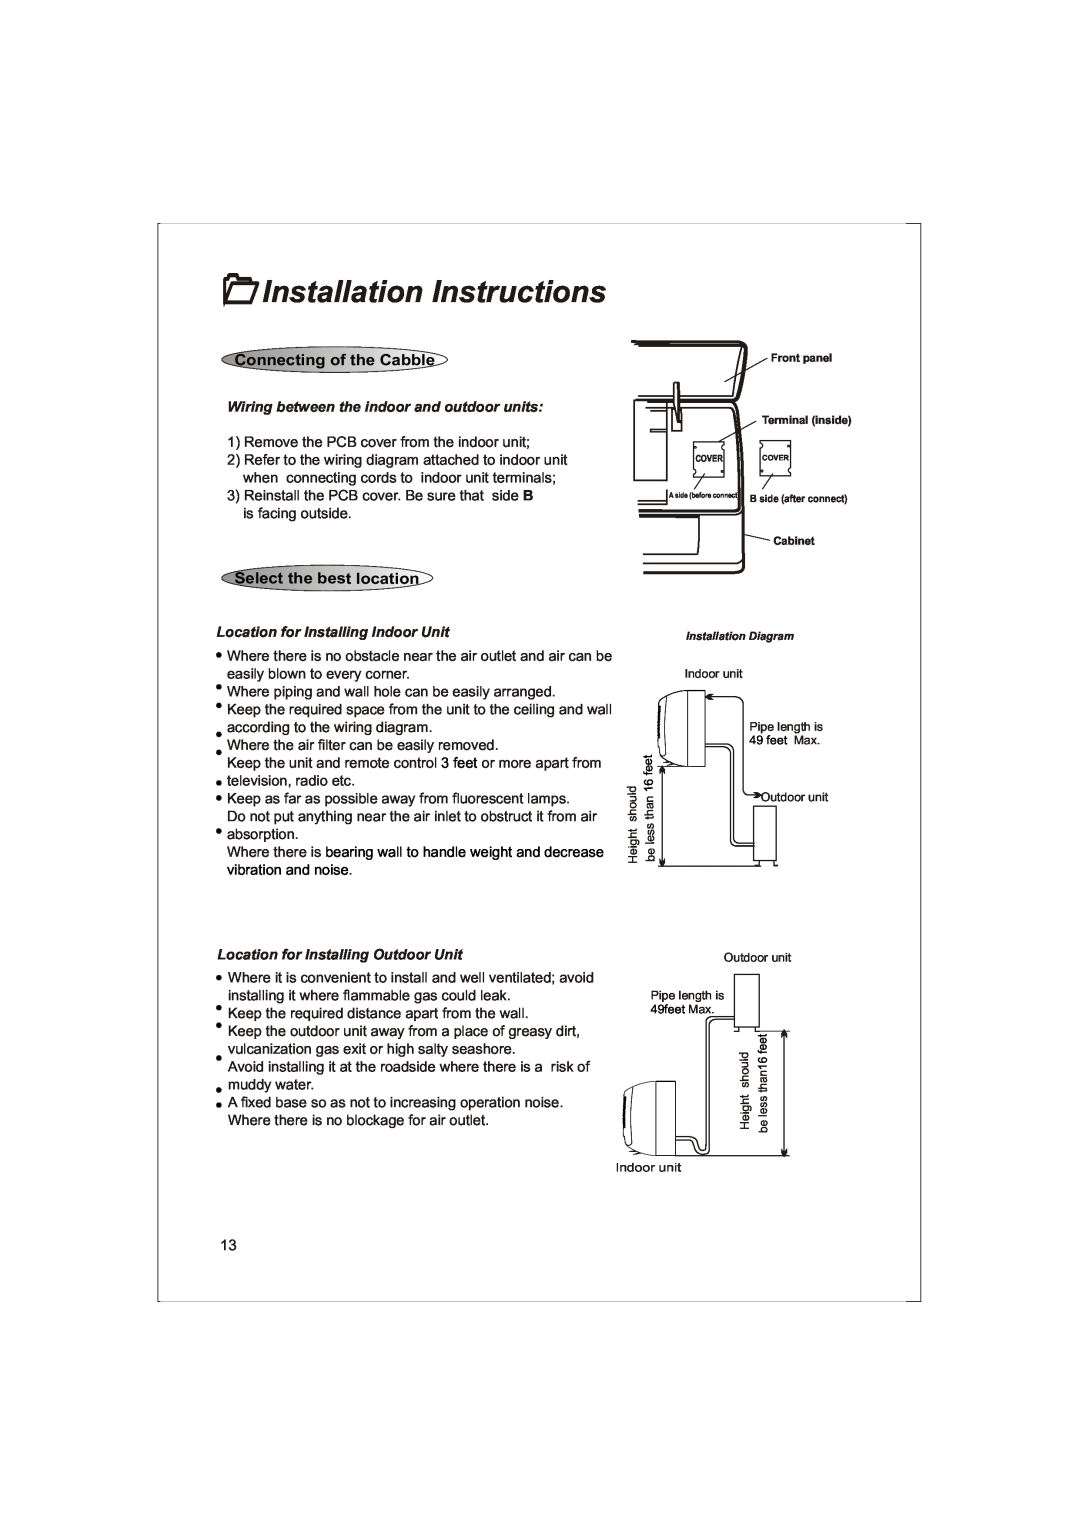 Soleus Air KFTHP-12-OD 1Installation Instructions, Connecting of the Cabble, Wiring between the indoor and outdoor units 